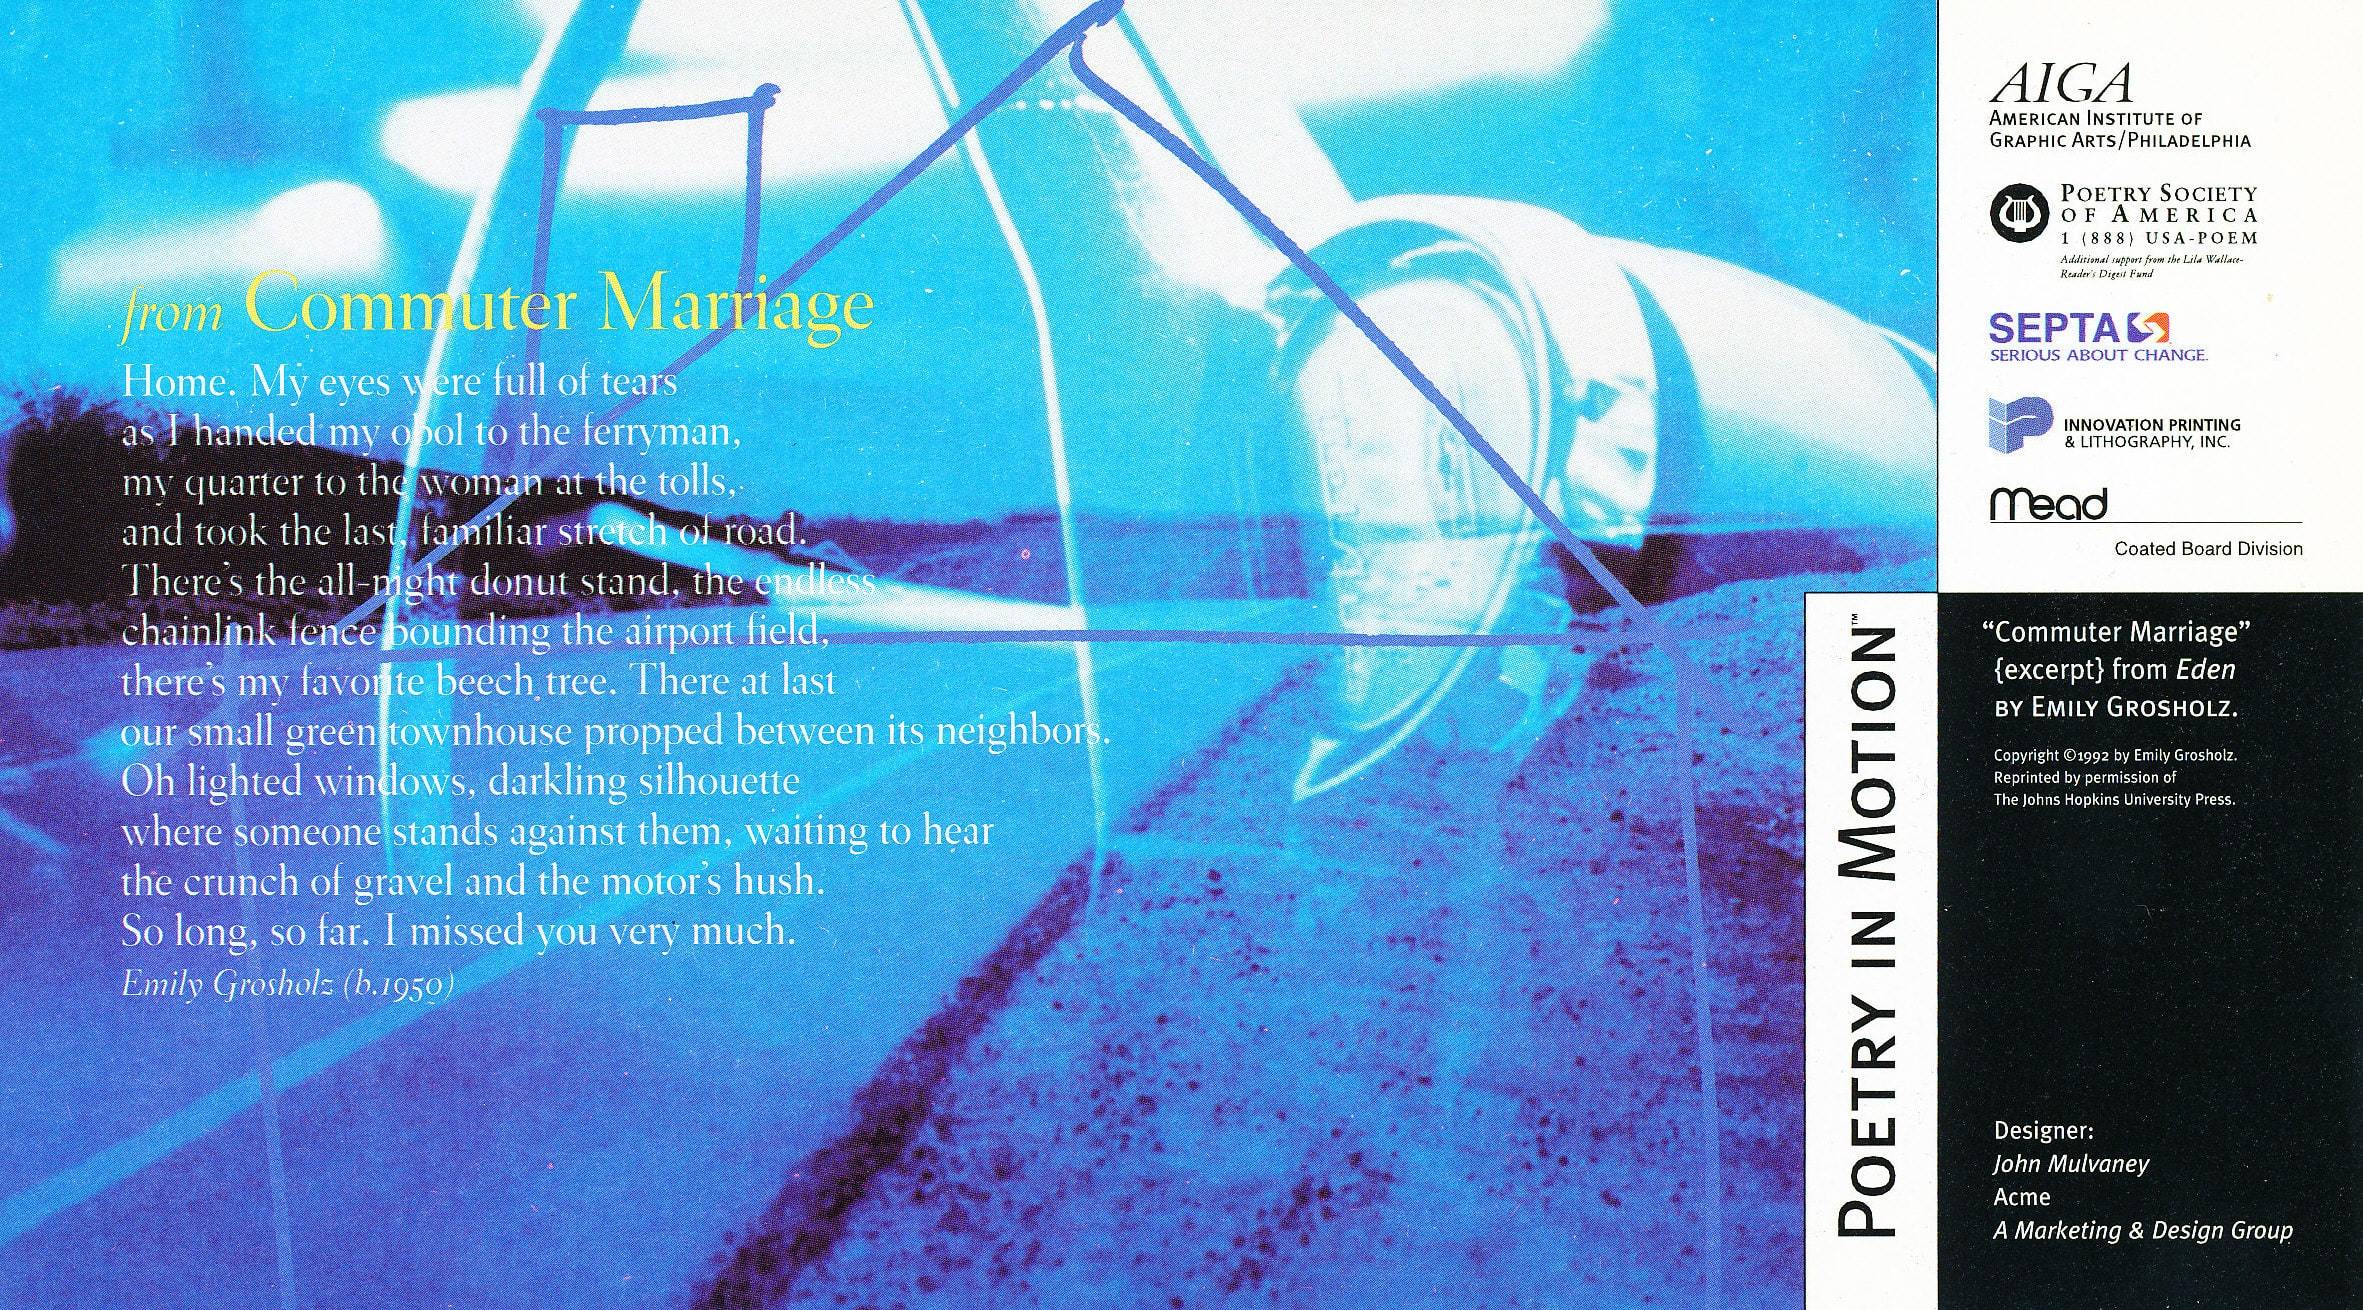 A horizontal poster features an excerpt from the poem Commuter Marriage, by Emily Grosholz. Behind the poem is an image of an open road as seen through a blue reflection.